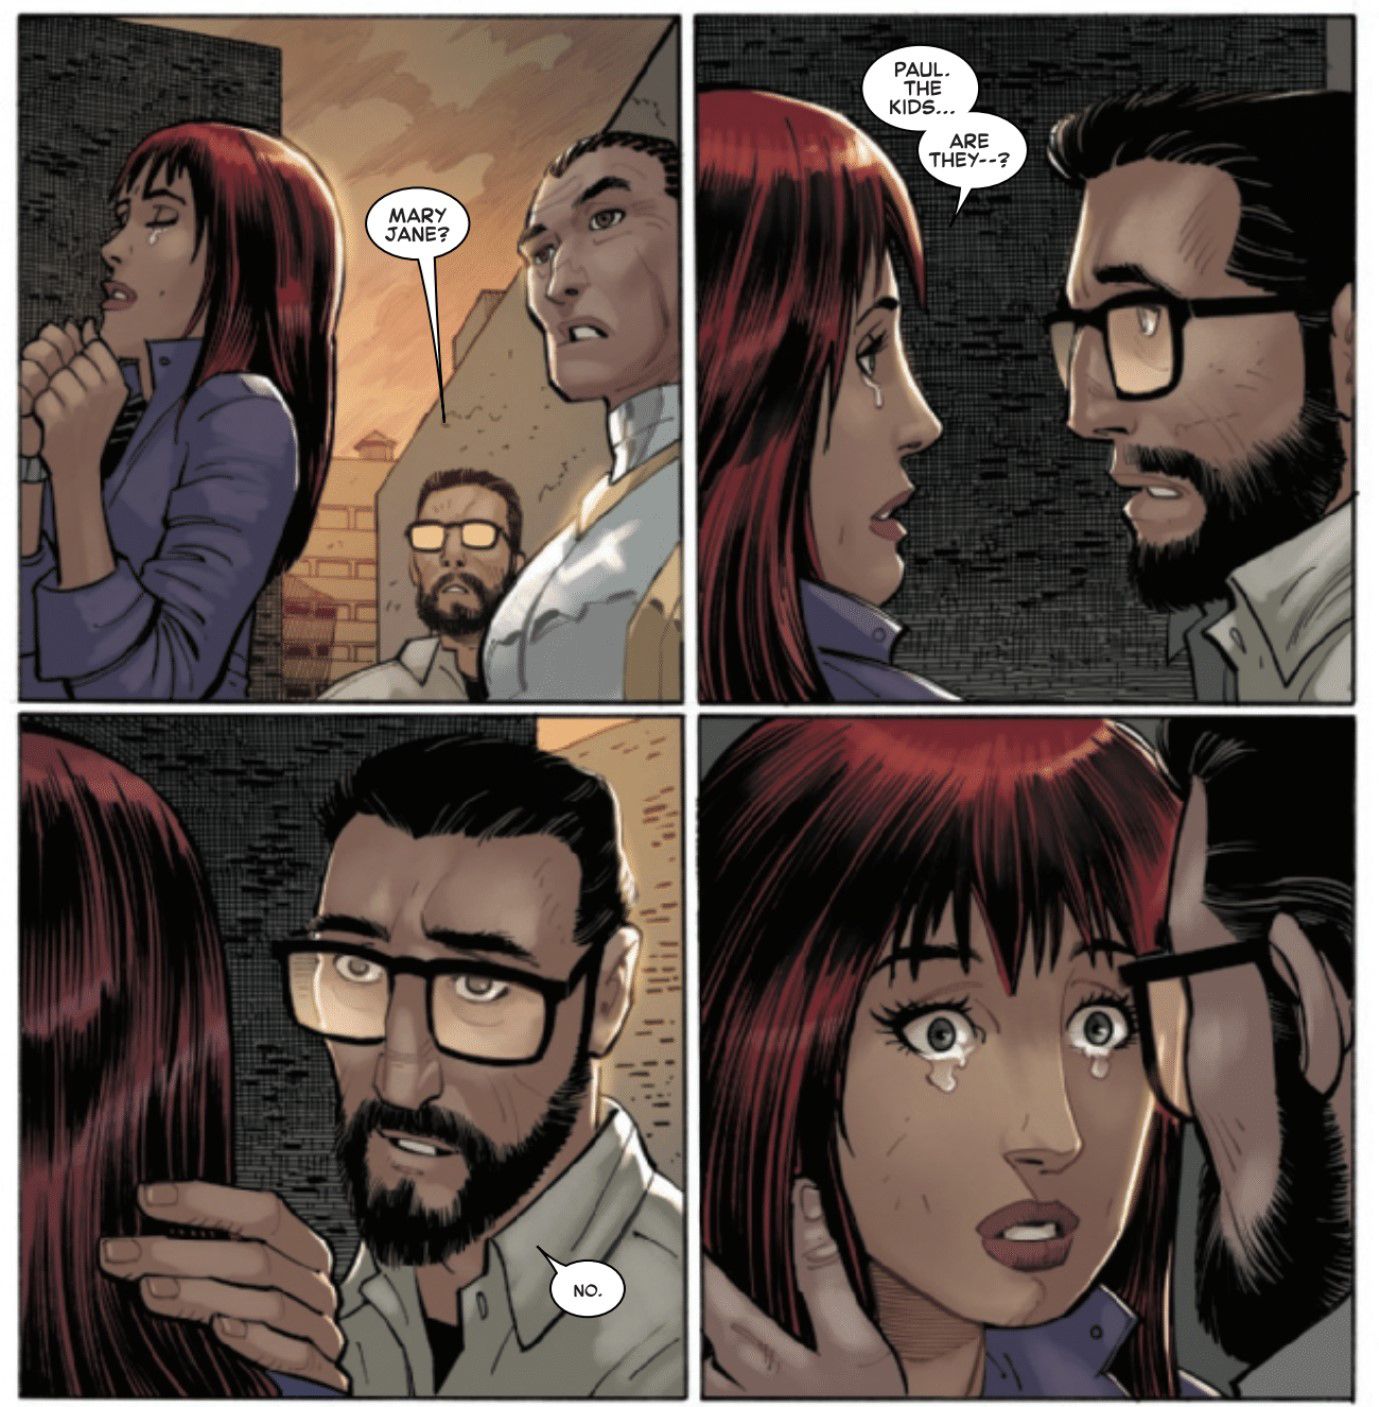 Mary Jane Watson's boyfriend, Paul, reveals to her that their adopted children no longer exist.